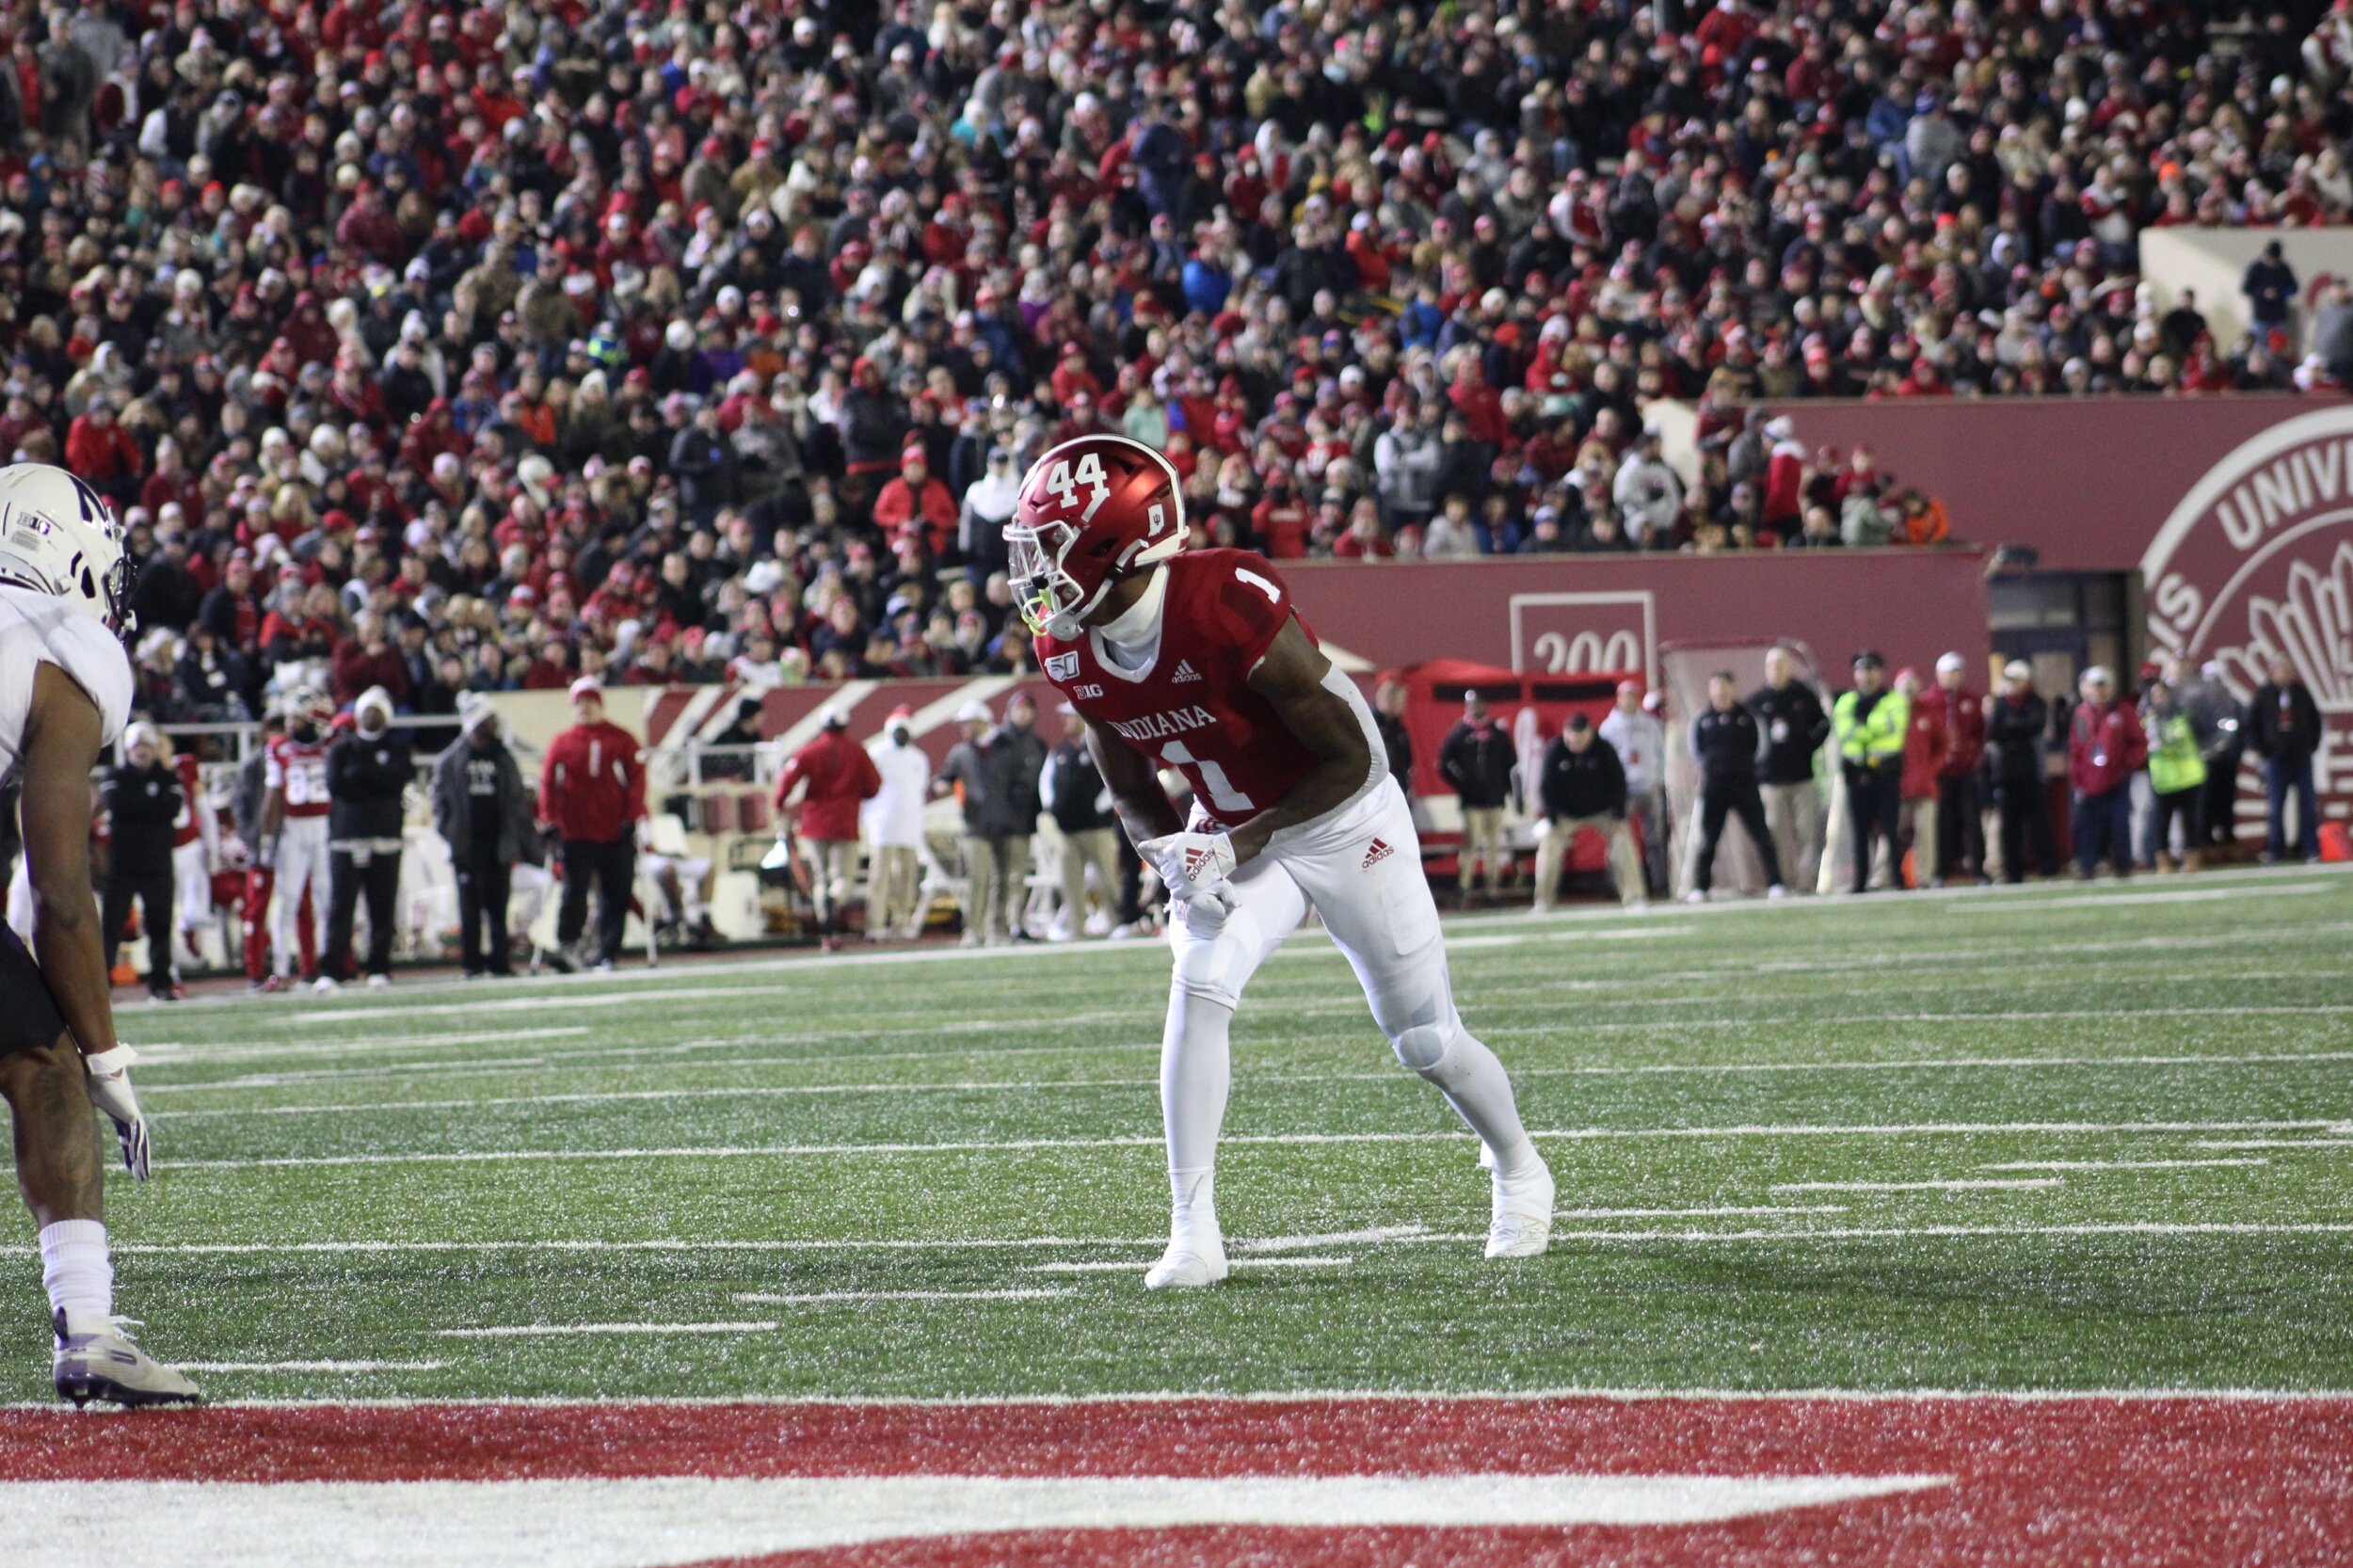  Junior WR Whop Philyor completes 2 passes for 72 yards in Indiana’s ?? Victory over Northwestern under Saturday night lights. The Tampa, Florida native posted 1002 yards on 70 catches in his 2019 season with 43 rushing yards and 5 touchdowns.&nbsp; 